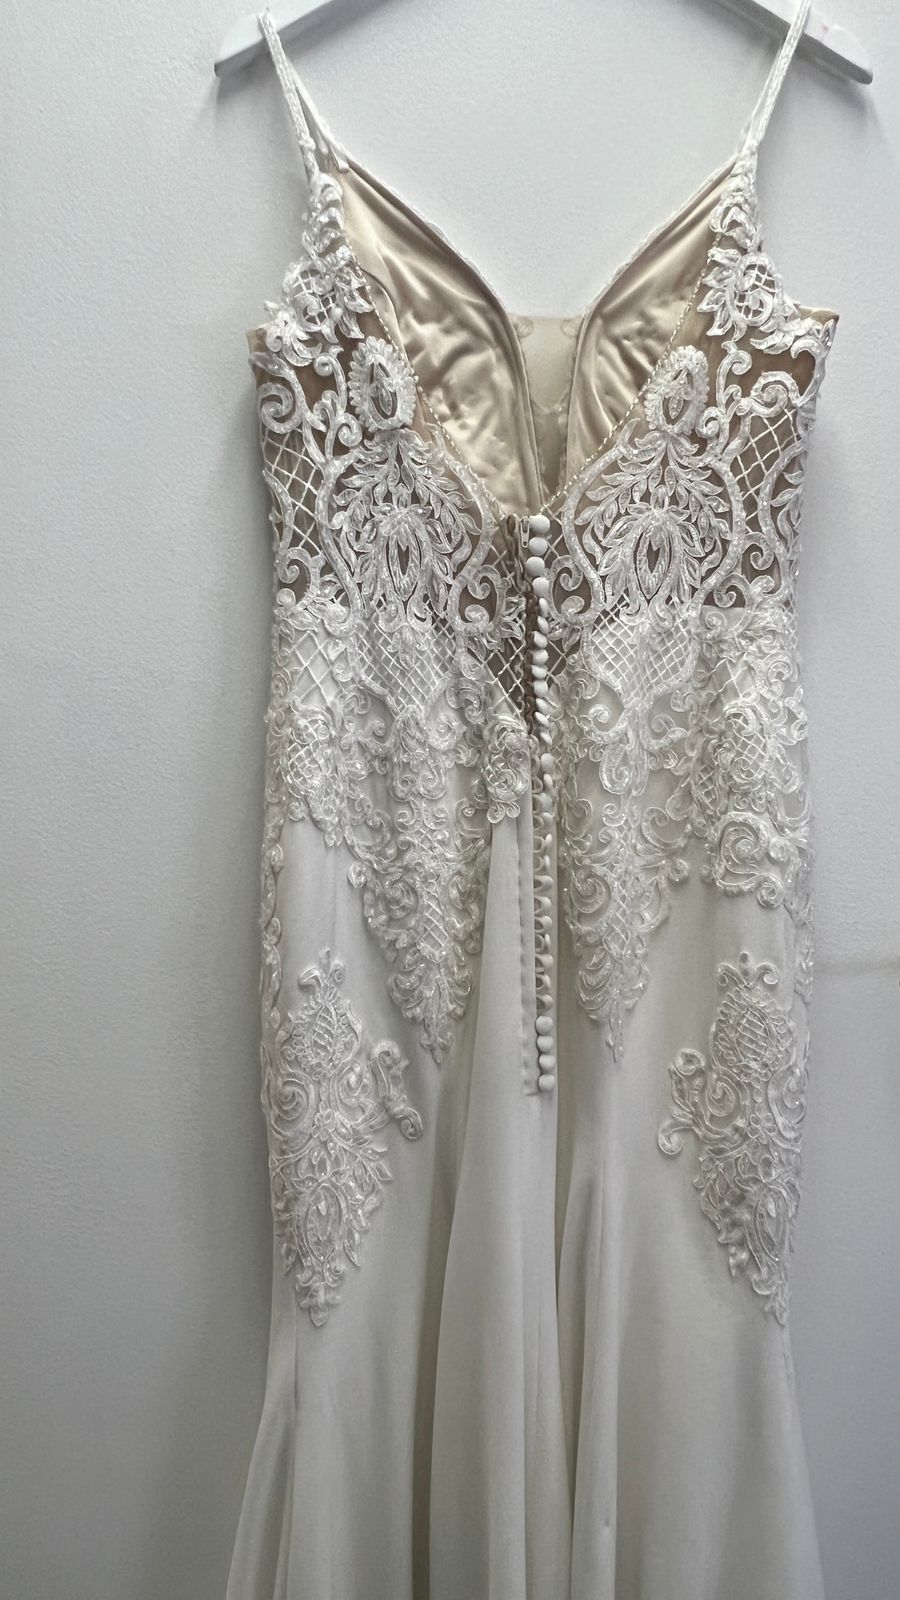 Code 2019: Milk fitted with lace covered nude lining, Size 14